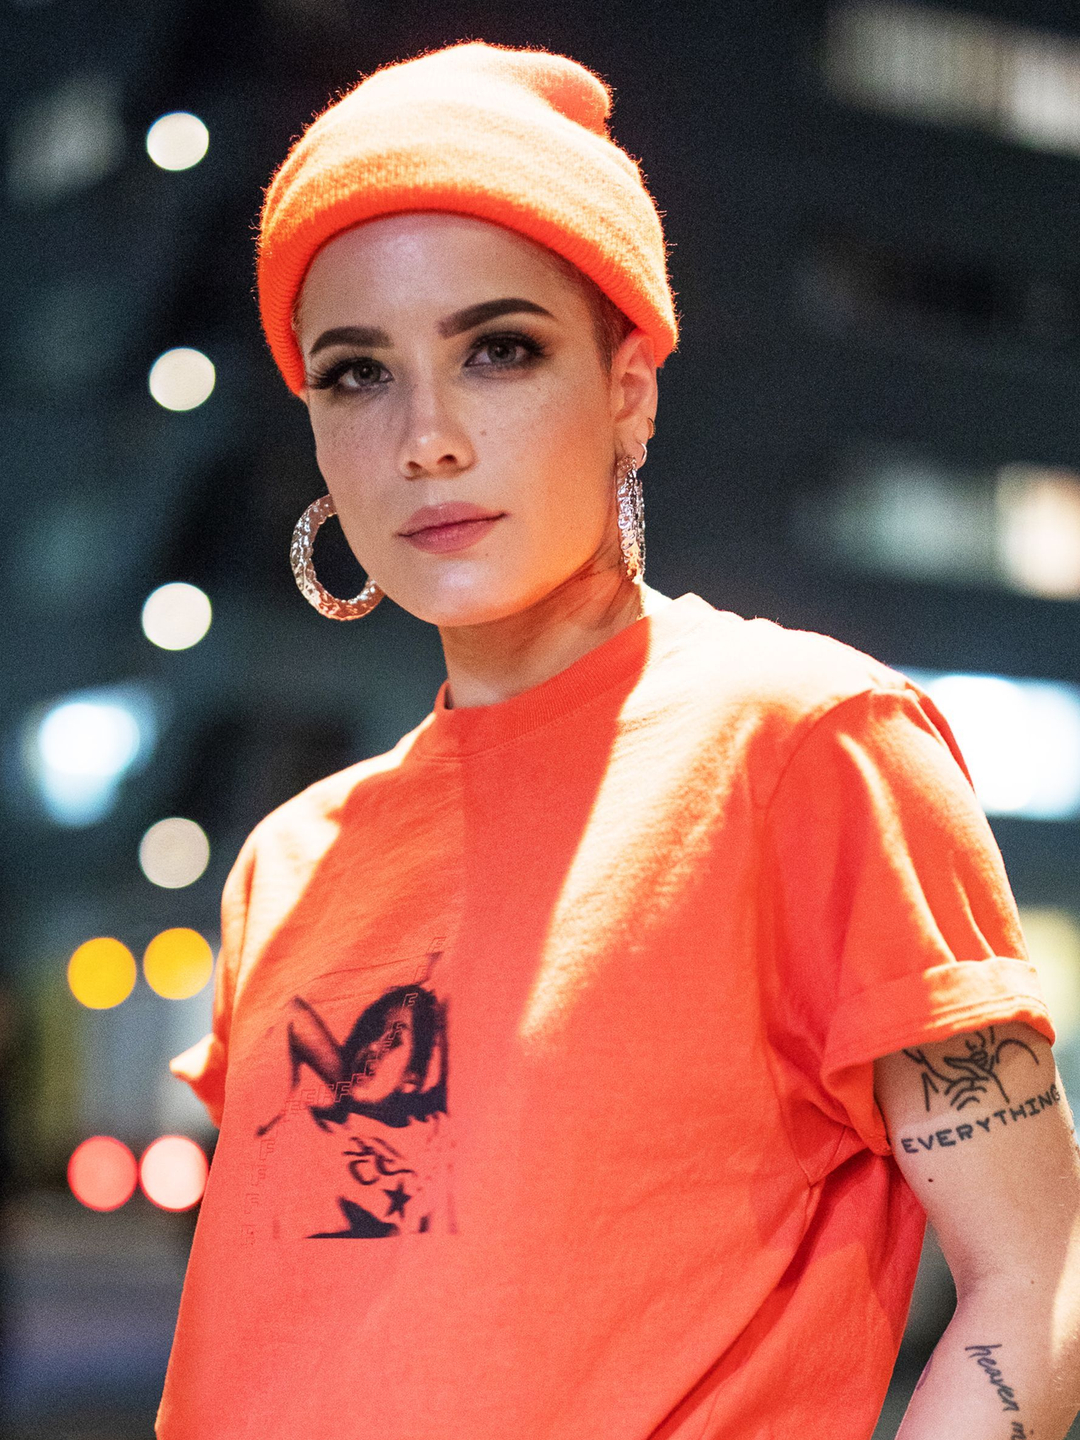 Halsey unphotoshopped pictures